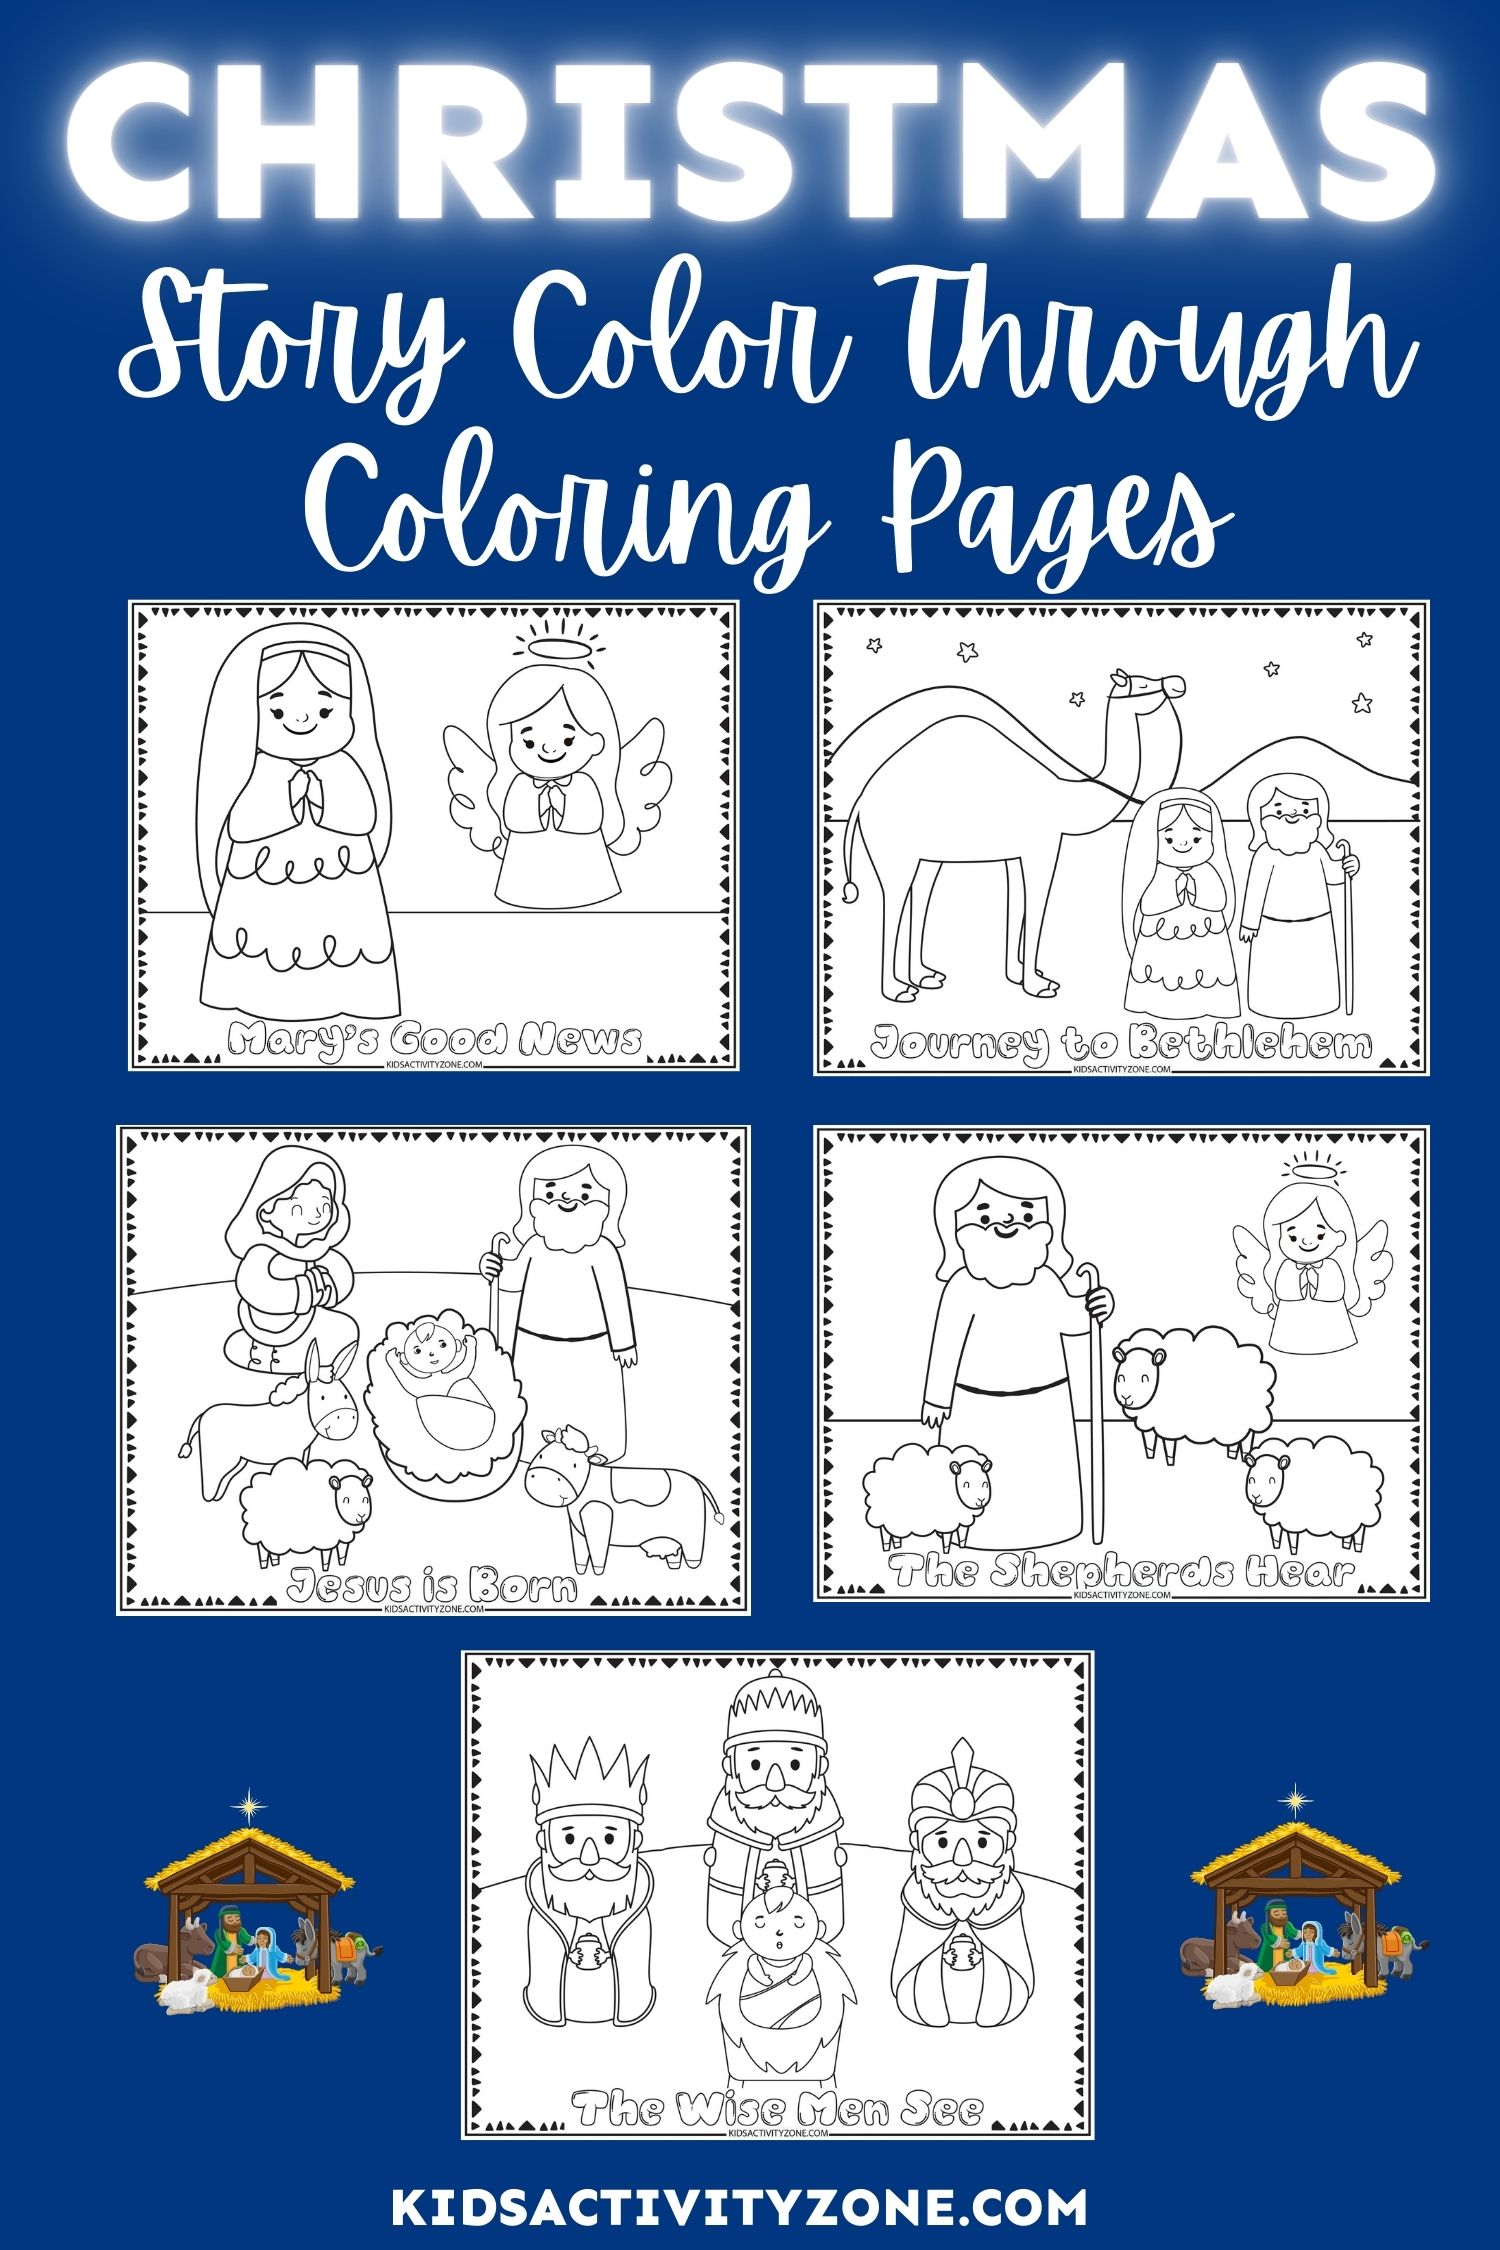 Christmas Story Coloring Pages Printable Featured Image